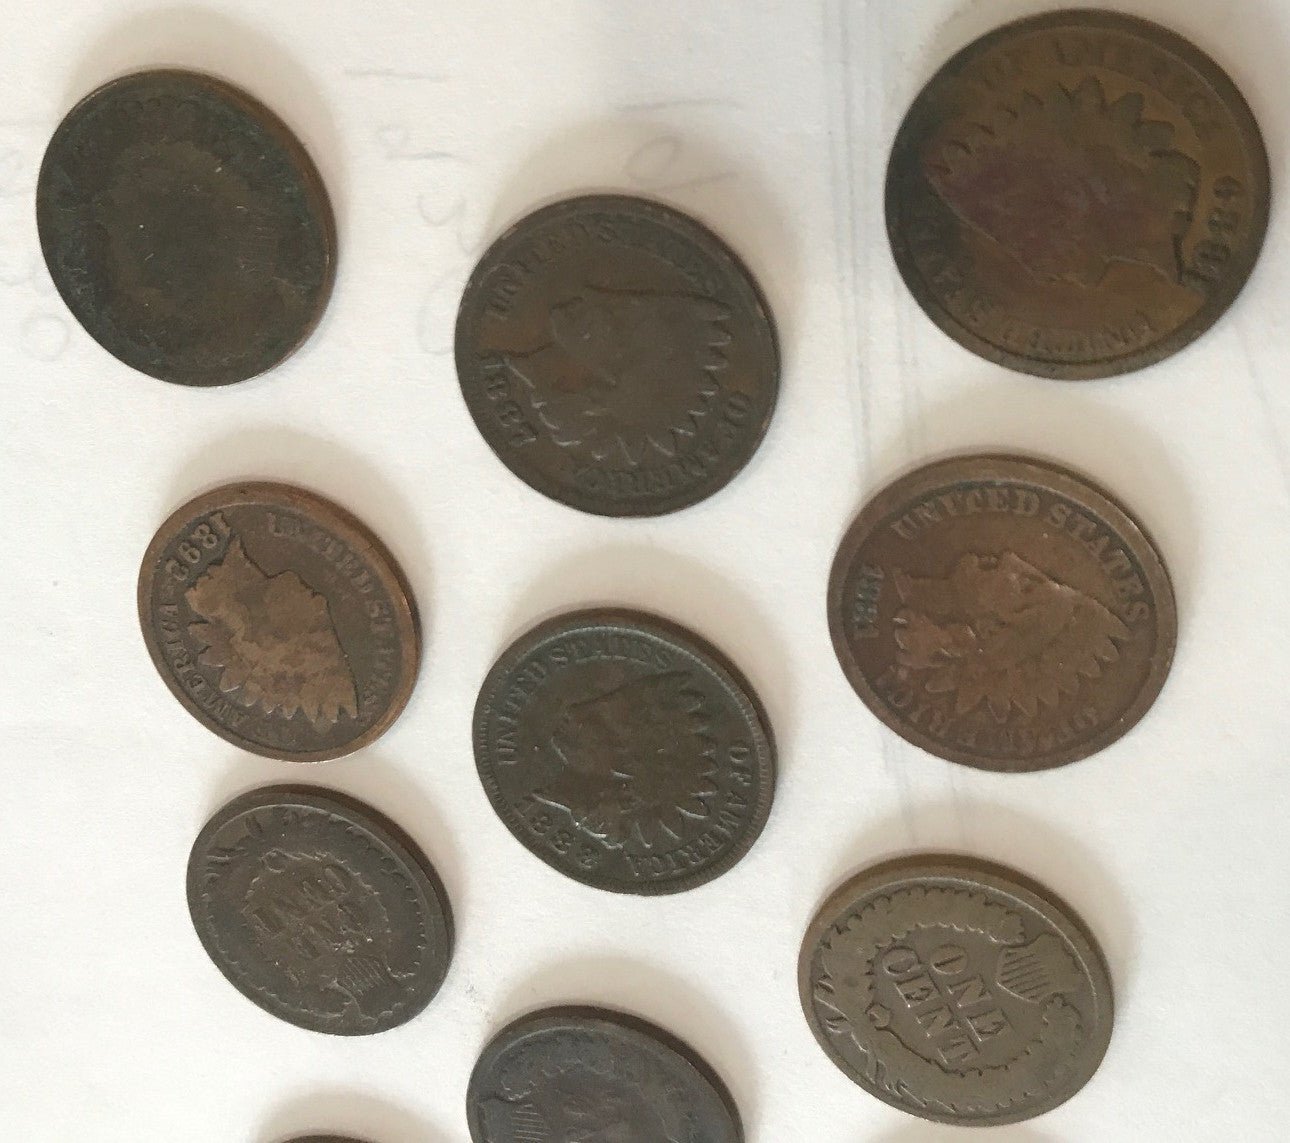 6 Different older Indian Head Cents Dated Before 1895 - US CoinSpot